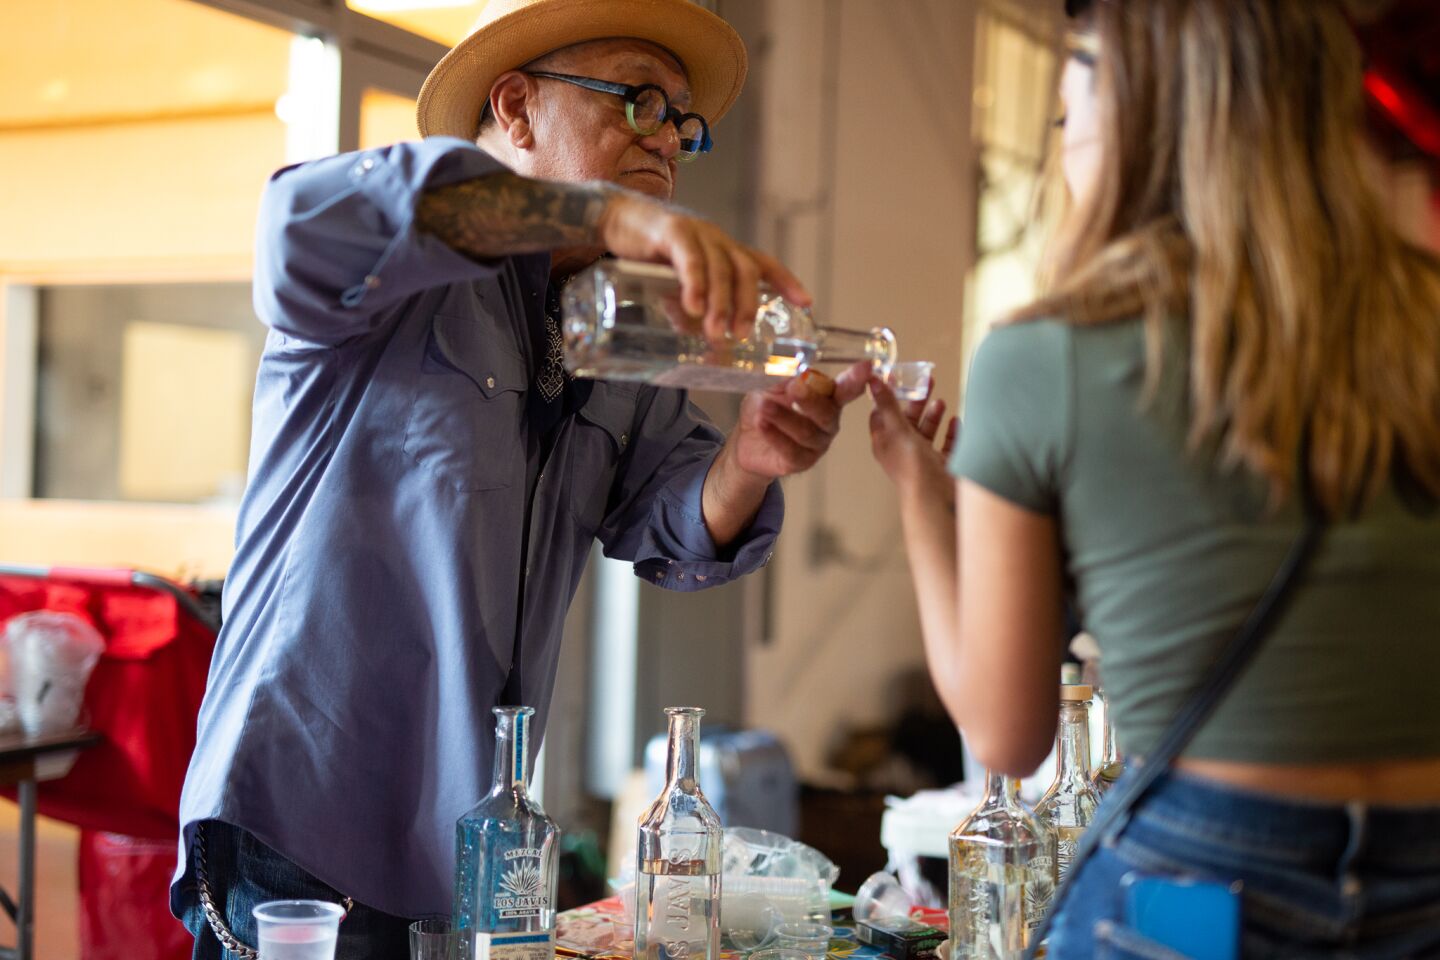 San Diegans headed to Mexico in a Bottle, a series of parties billed as "North America's biggest, and baddest, mezcal tastings," on Sunday, Oct. 3, 2021 at Bread & Salt gallery.